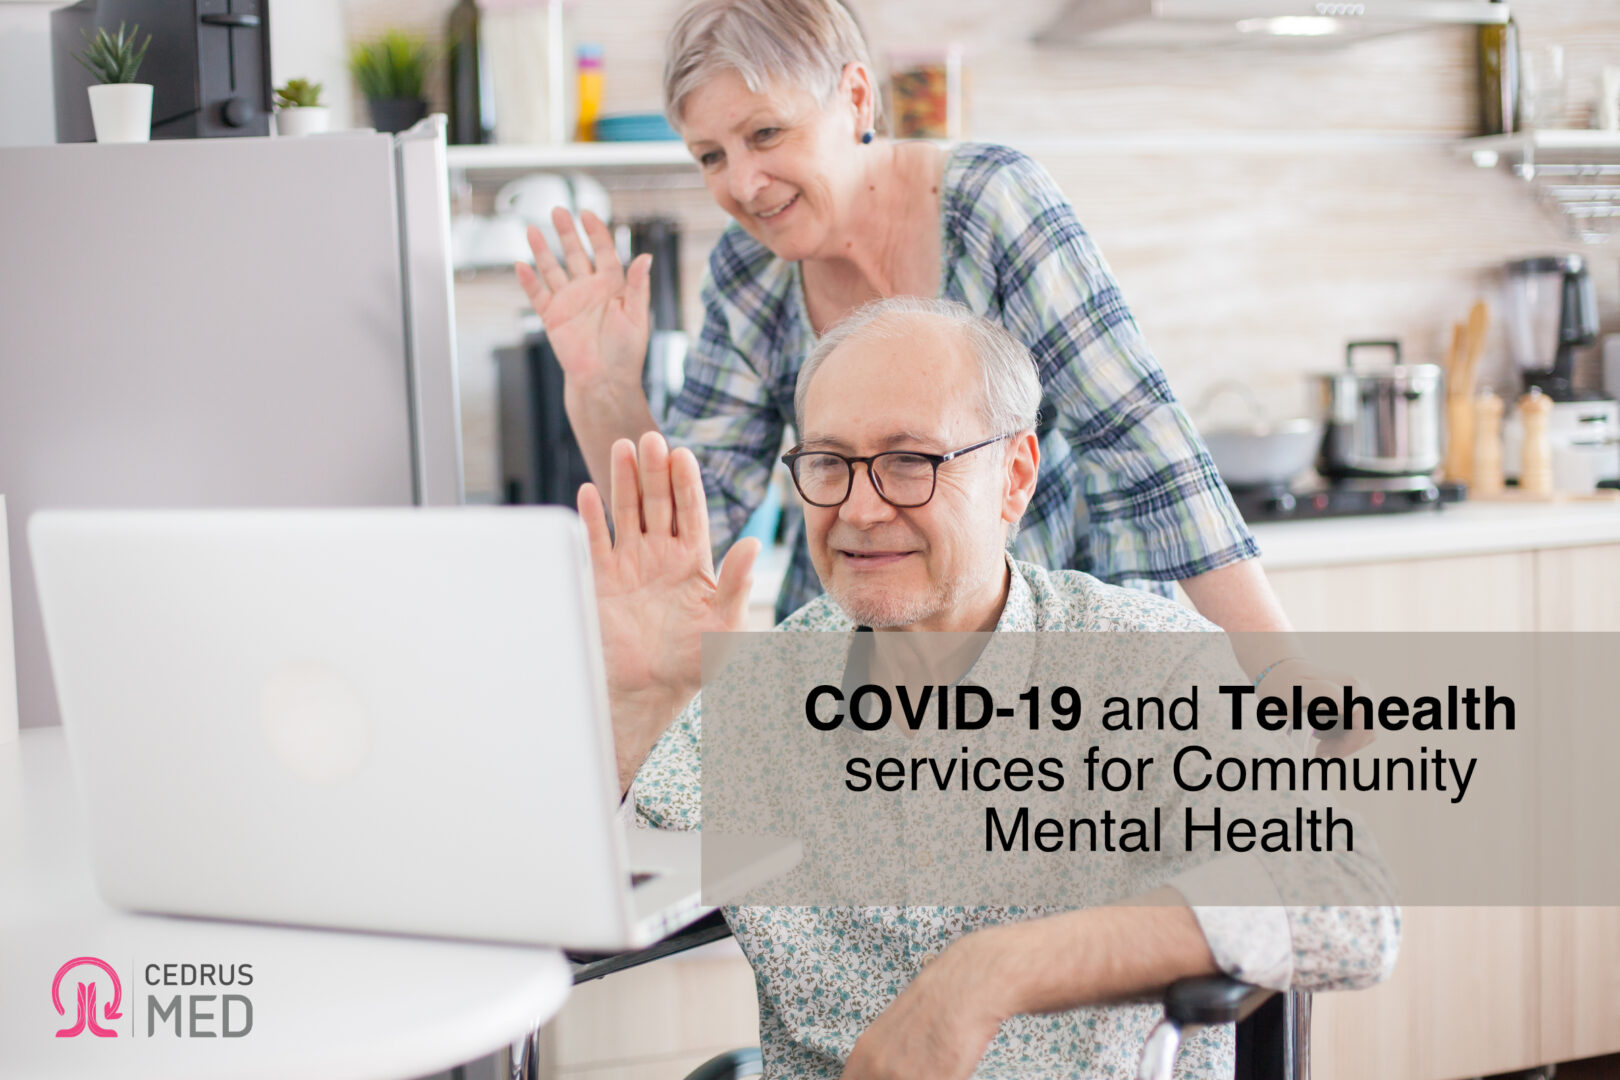 COVID-19 and Telehealth services for Community Mental Health